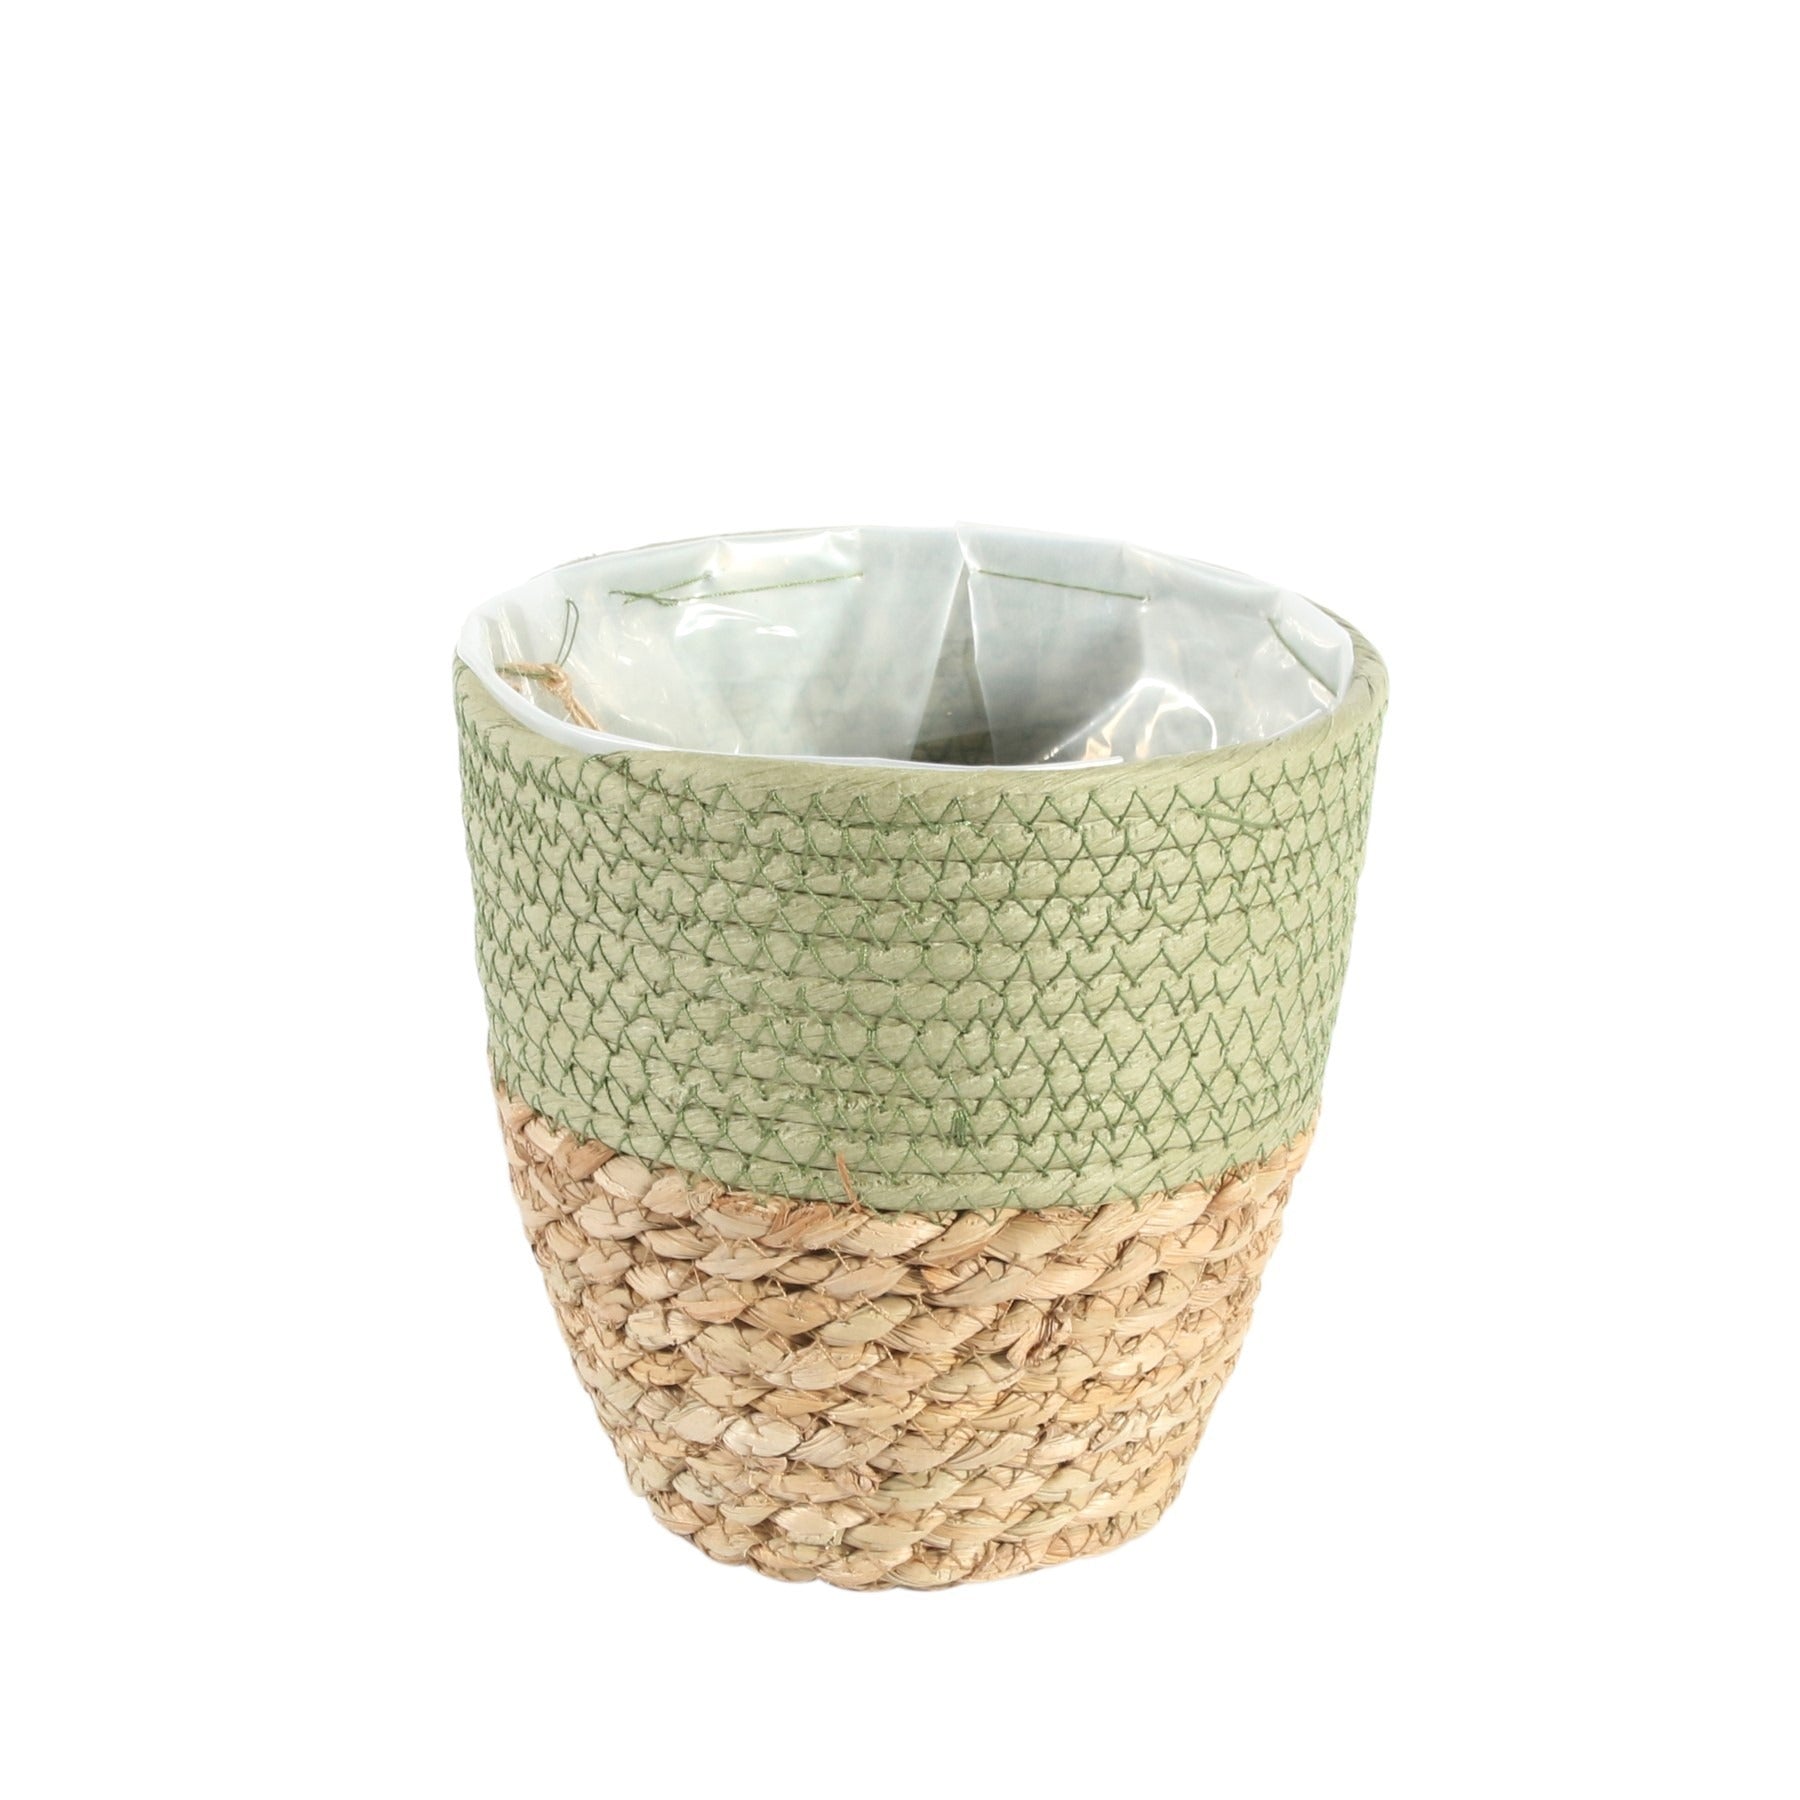 View 16cm Round Two Tone Seagrass and Green Paper Basket information